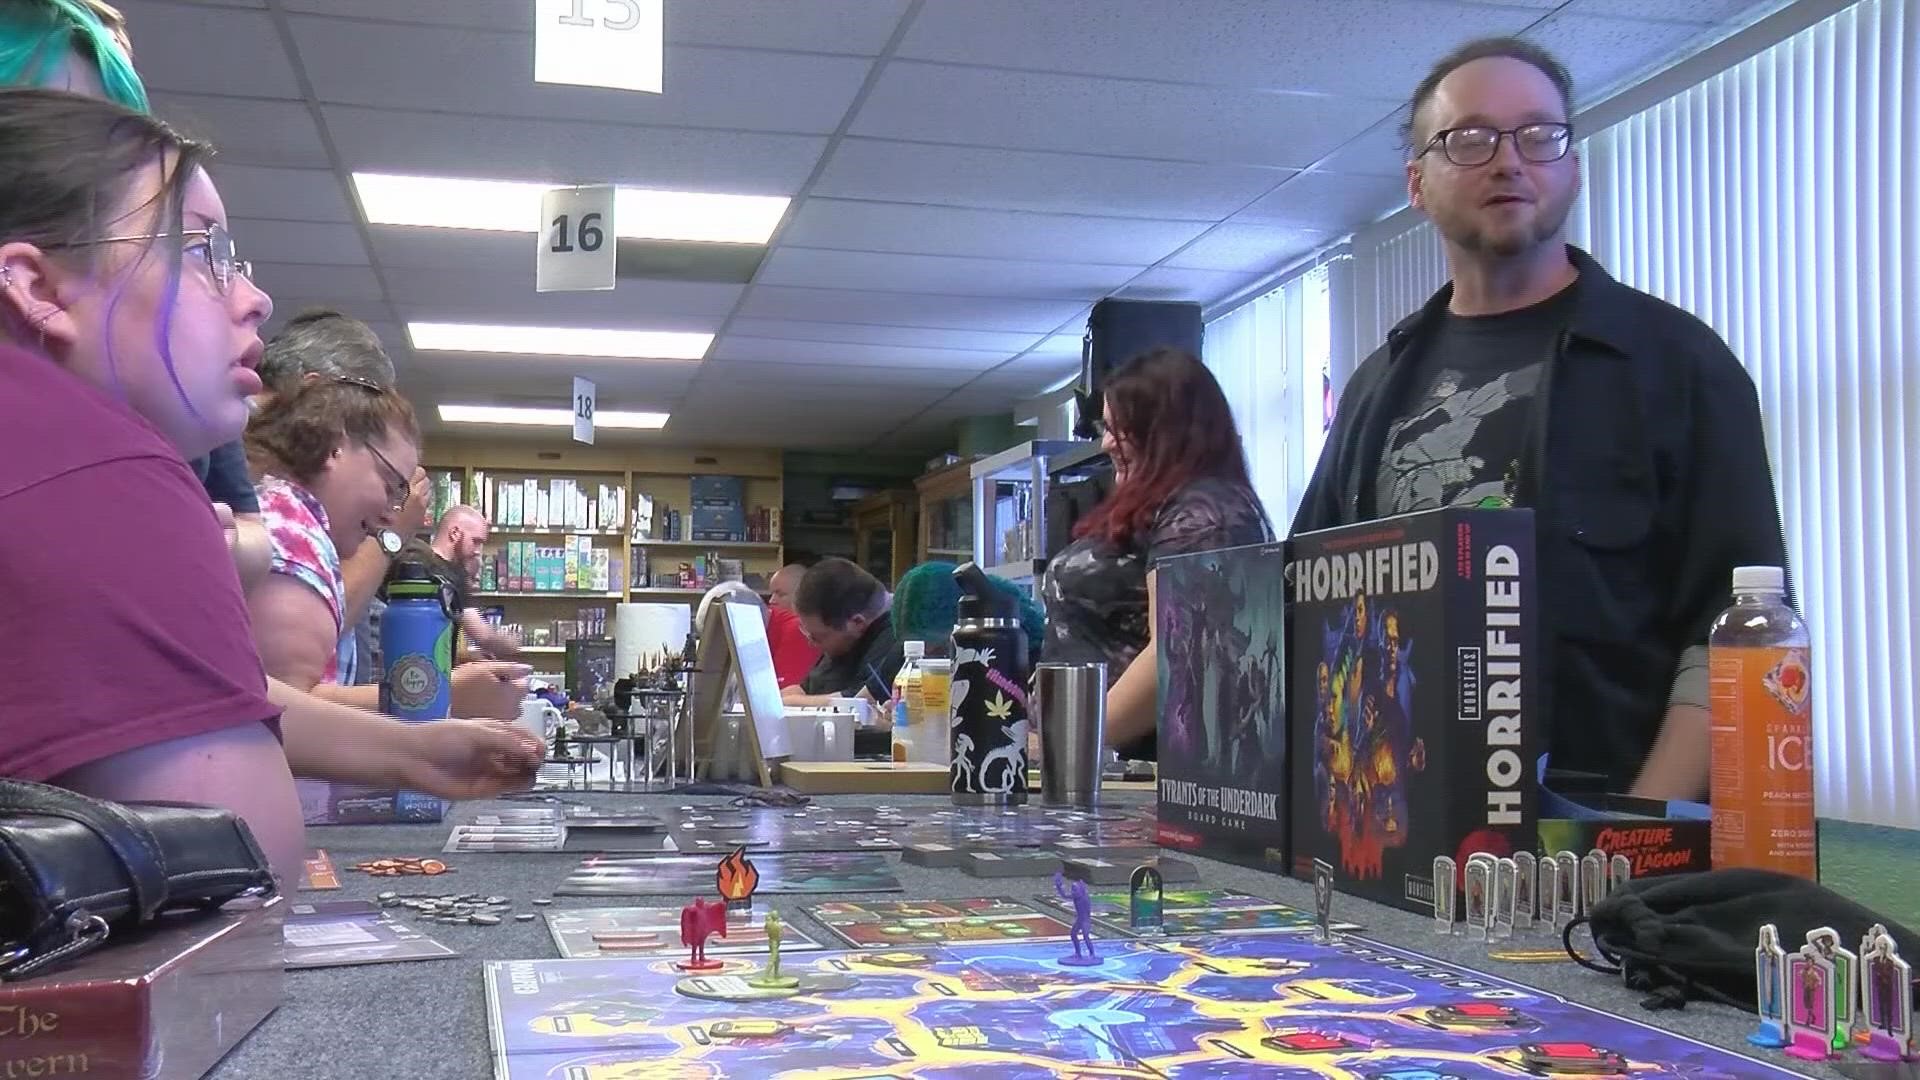 Game enthusiasts and comic fans got together at the Toledo Game Room on Sylvania Ave. on Saturday for a day of fun and comradery.